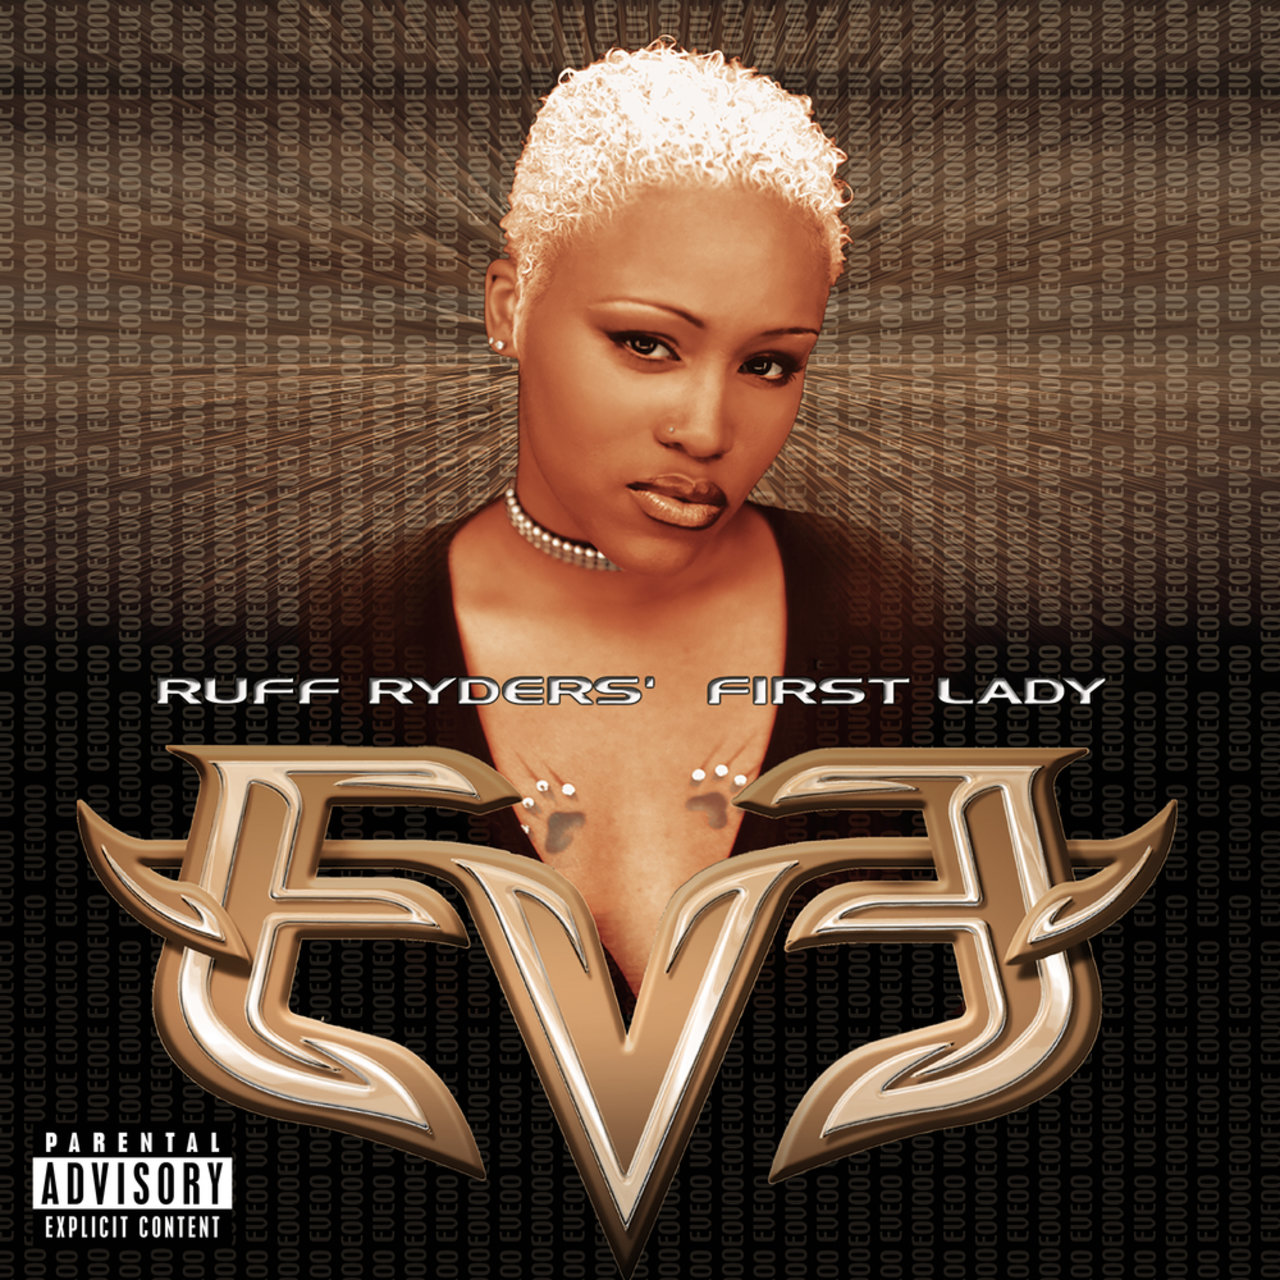 Eve - Let There Be Eve… Ruff Ryders' First Lady (Cover)